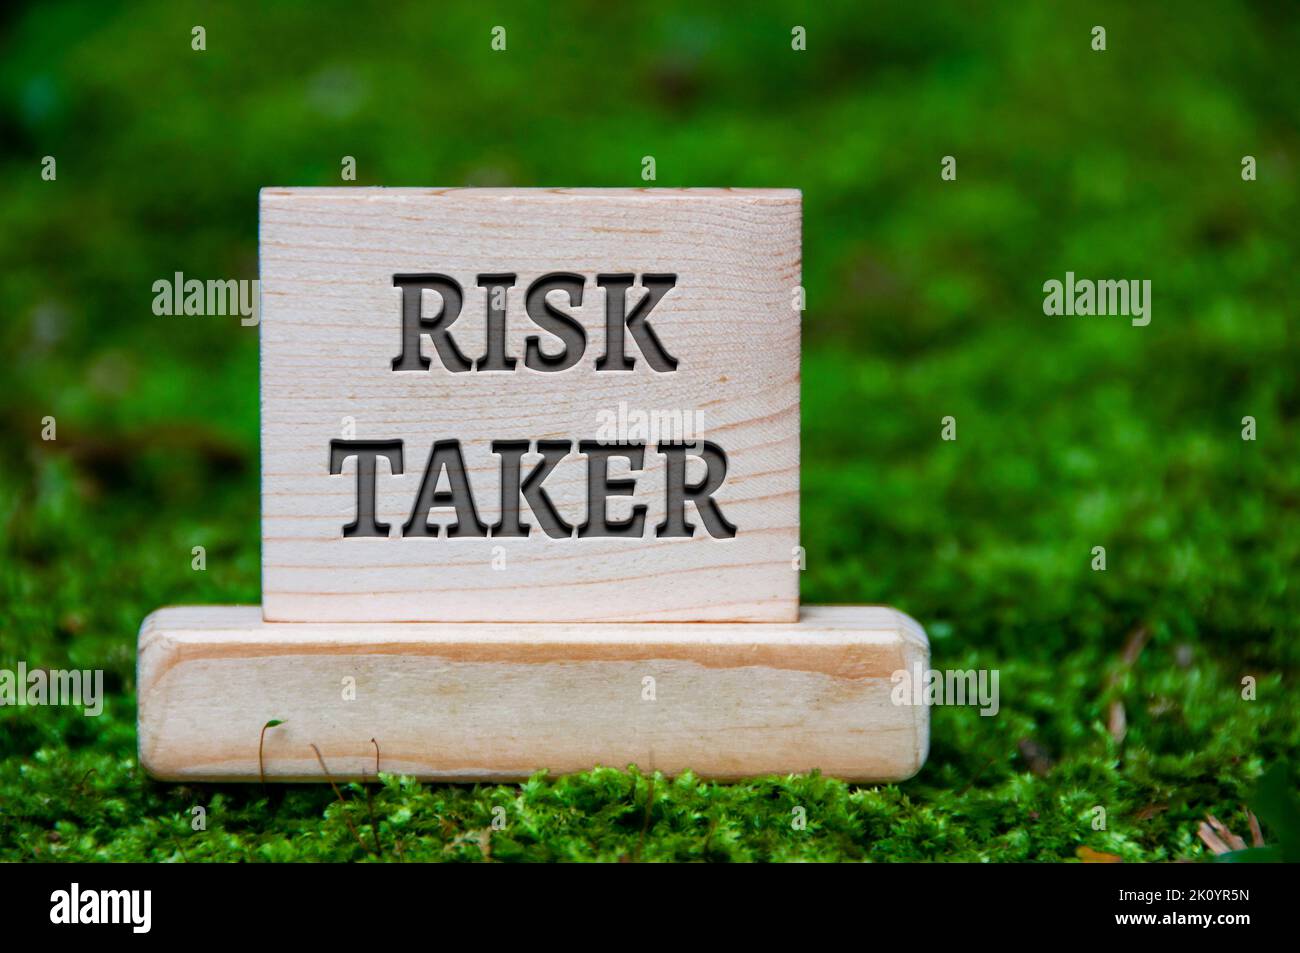 Risk taker text on wooden block with green nature background. Motivational and business concept. Stock Photo